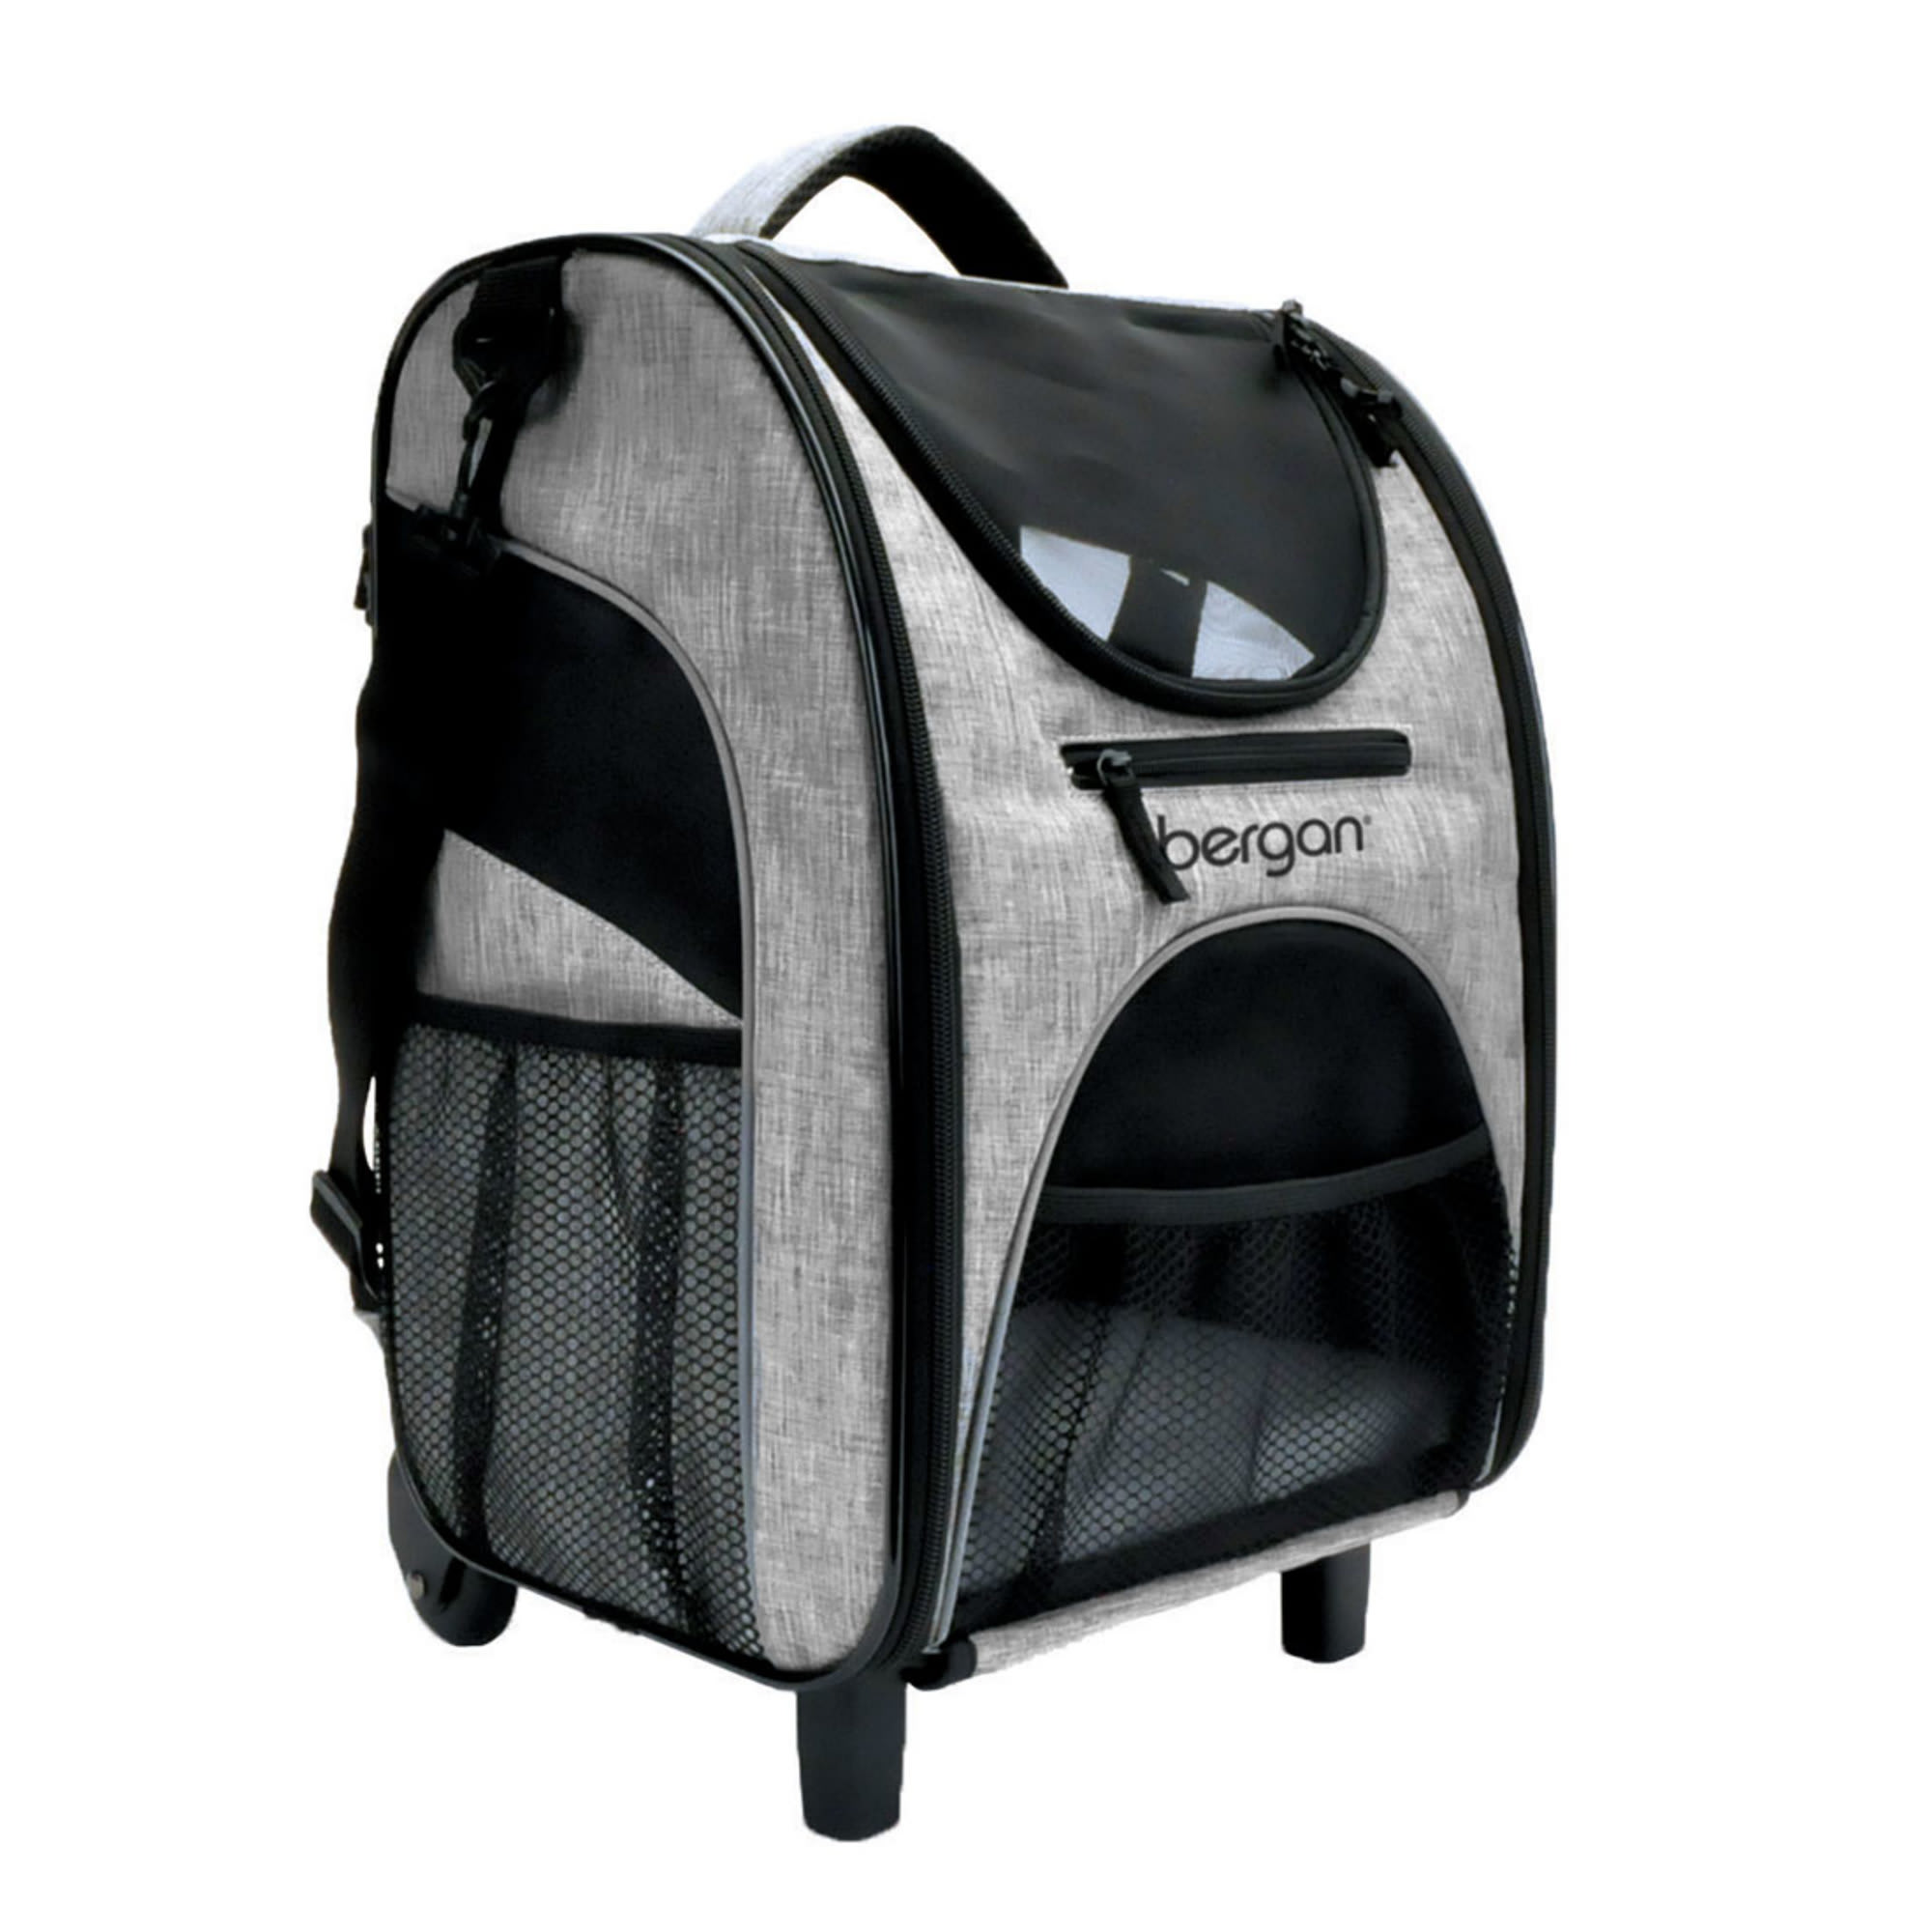 Retriever 41245 40 inch x 27 inch x 30 inch Gray Pet Carrier, Large, for Dogs 70 to 90 lbs, Men's